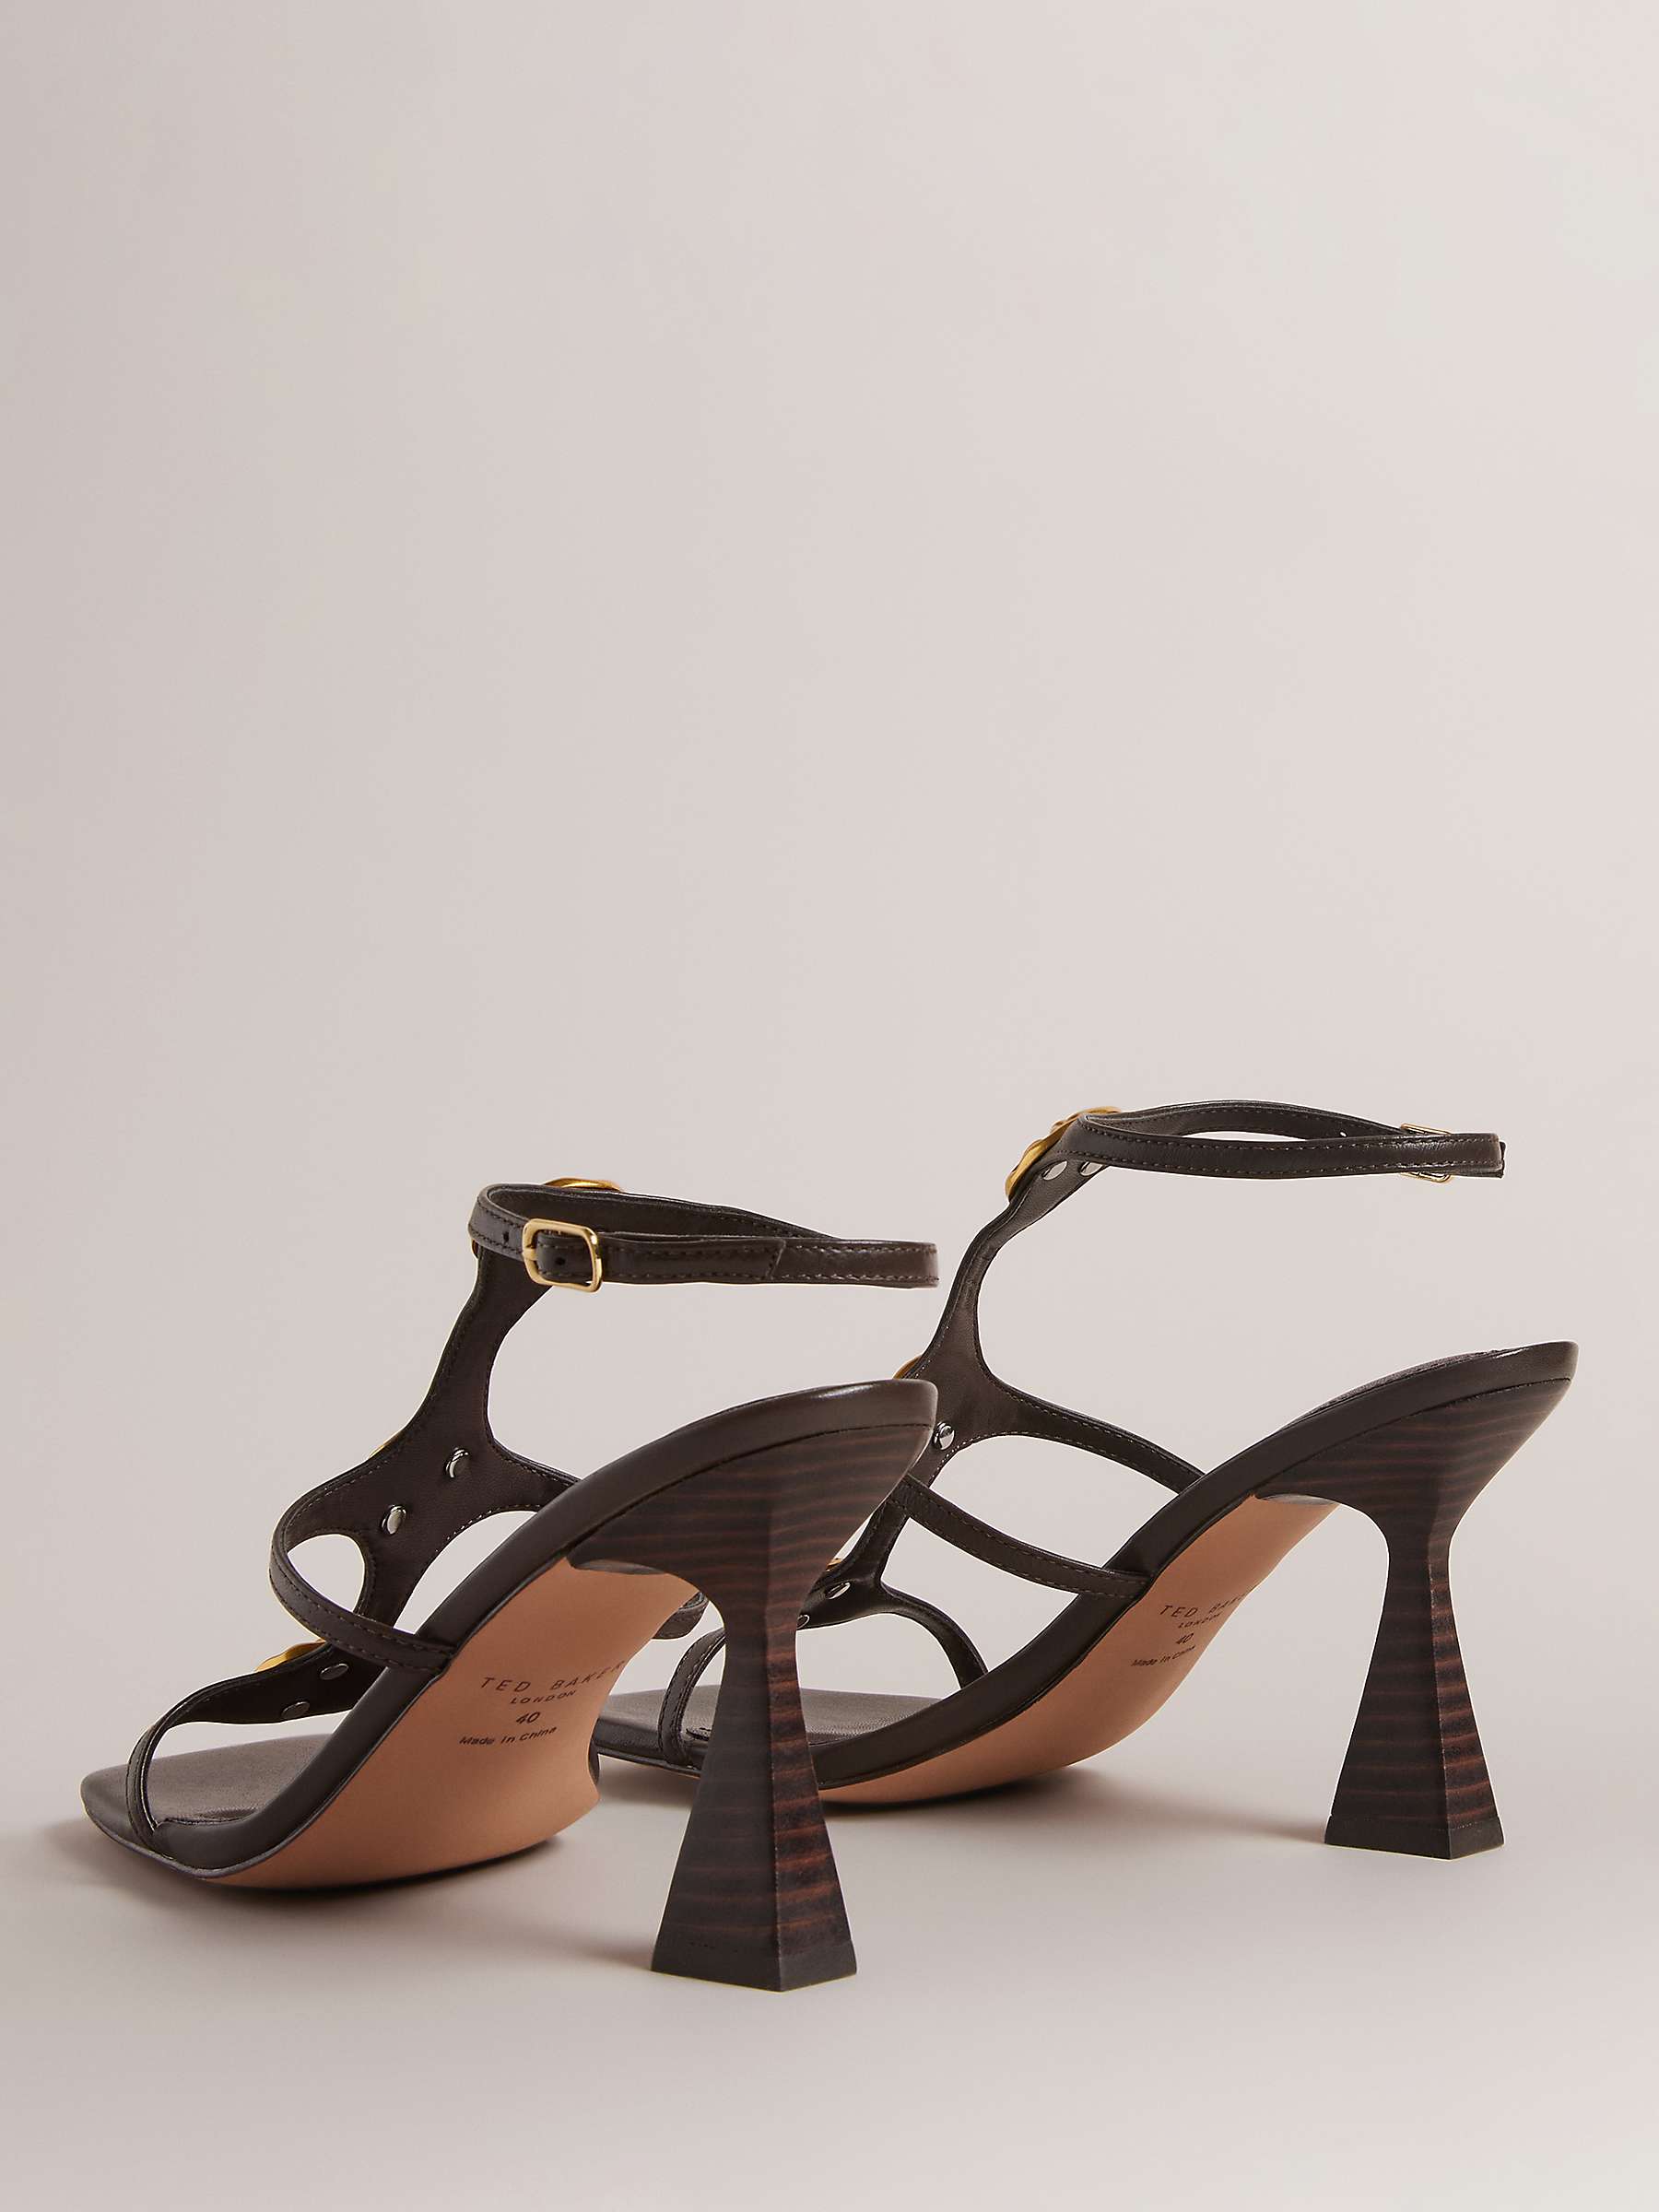 Buy Ted Baker Tayalin High Heel Leather Sandals Online at johnlewis.com